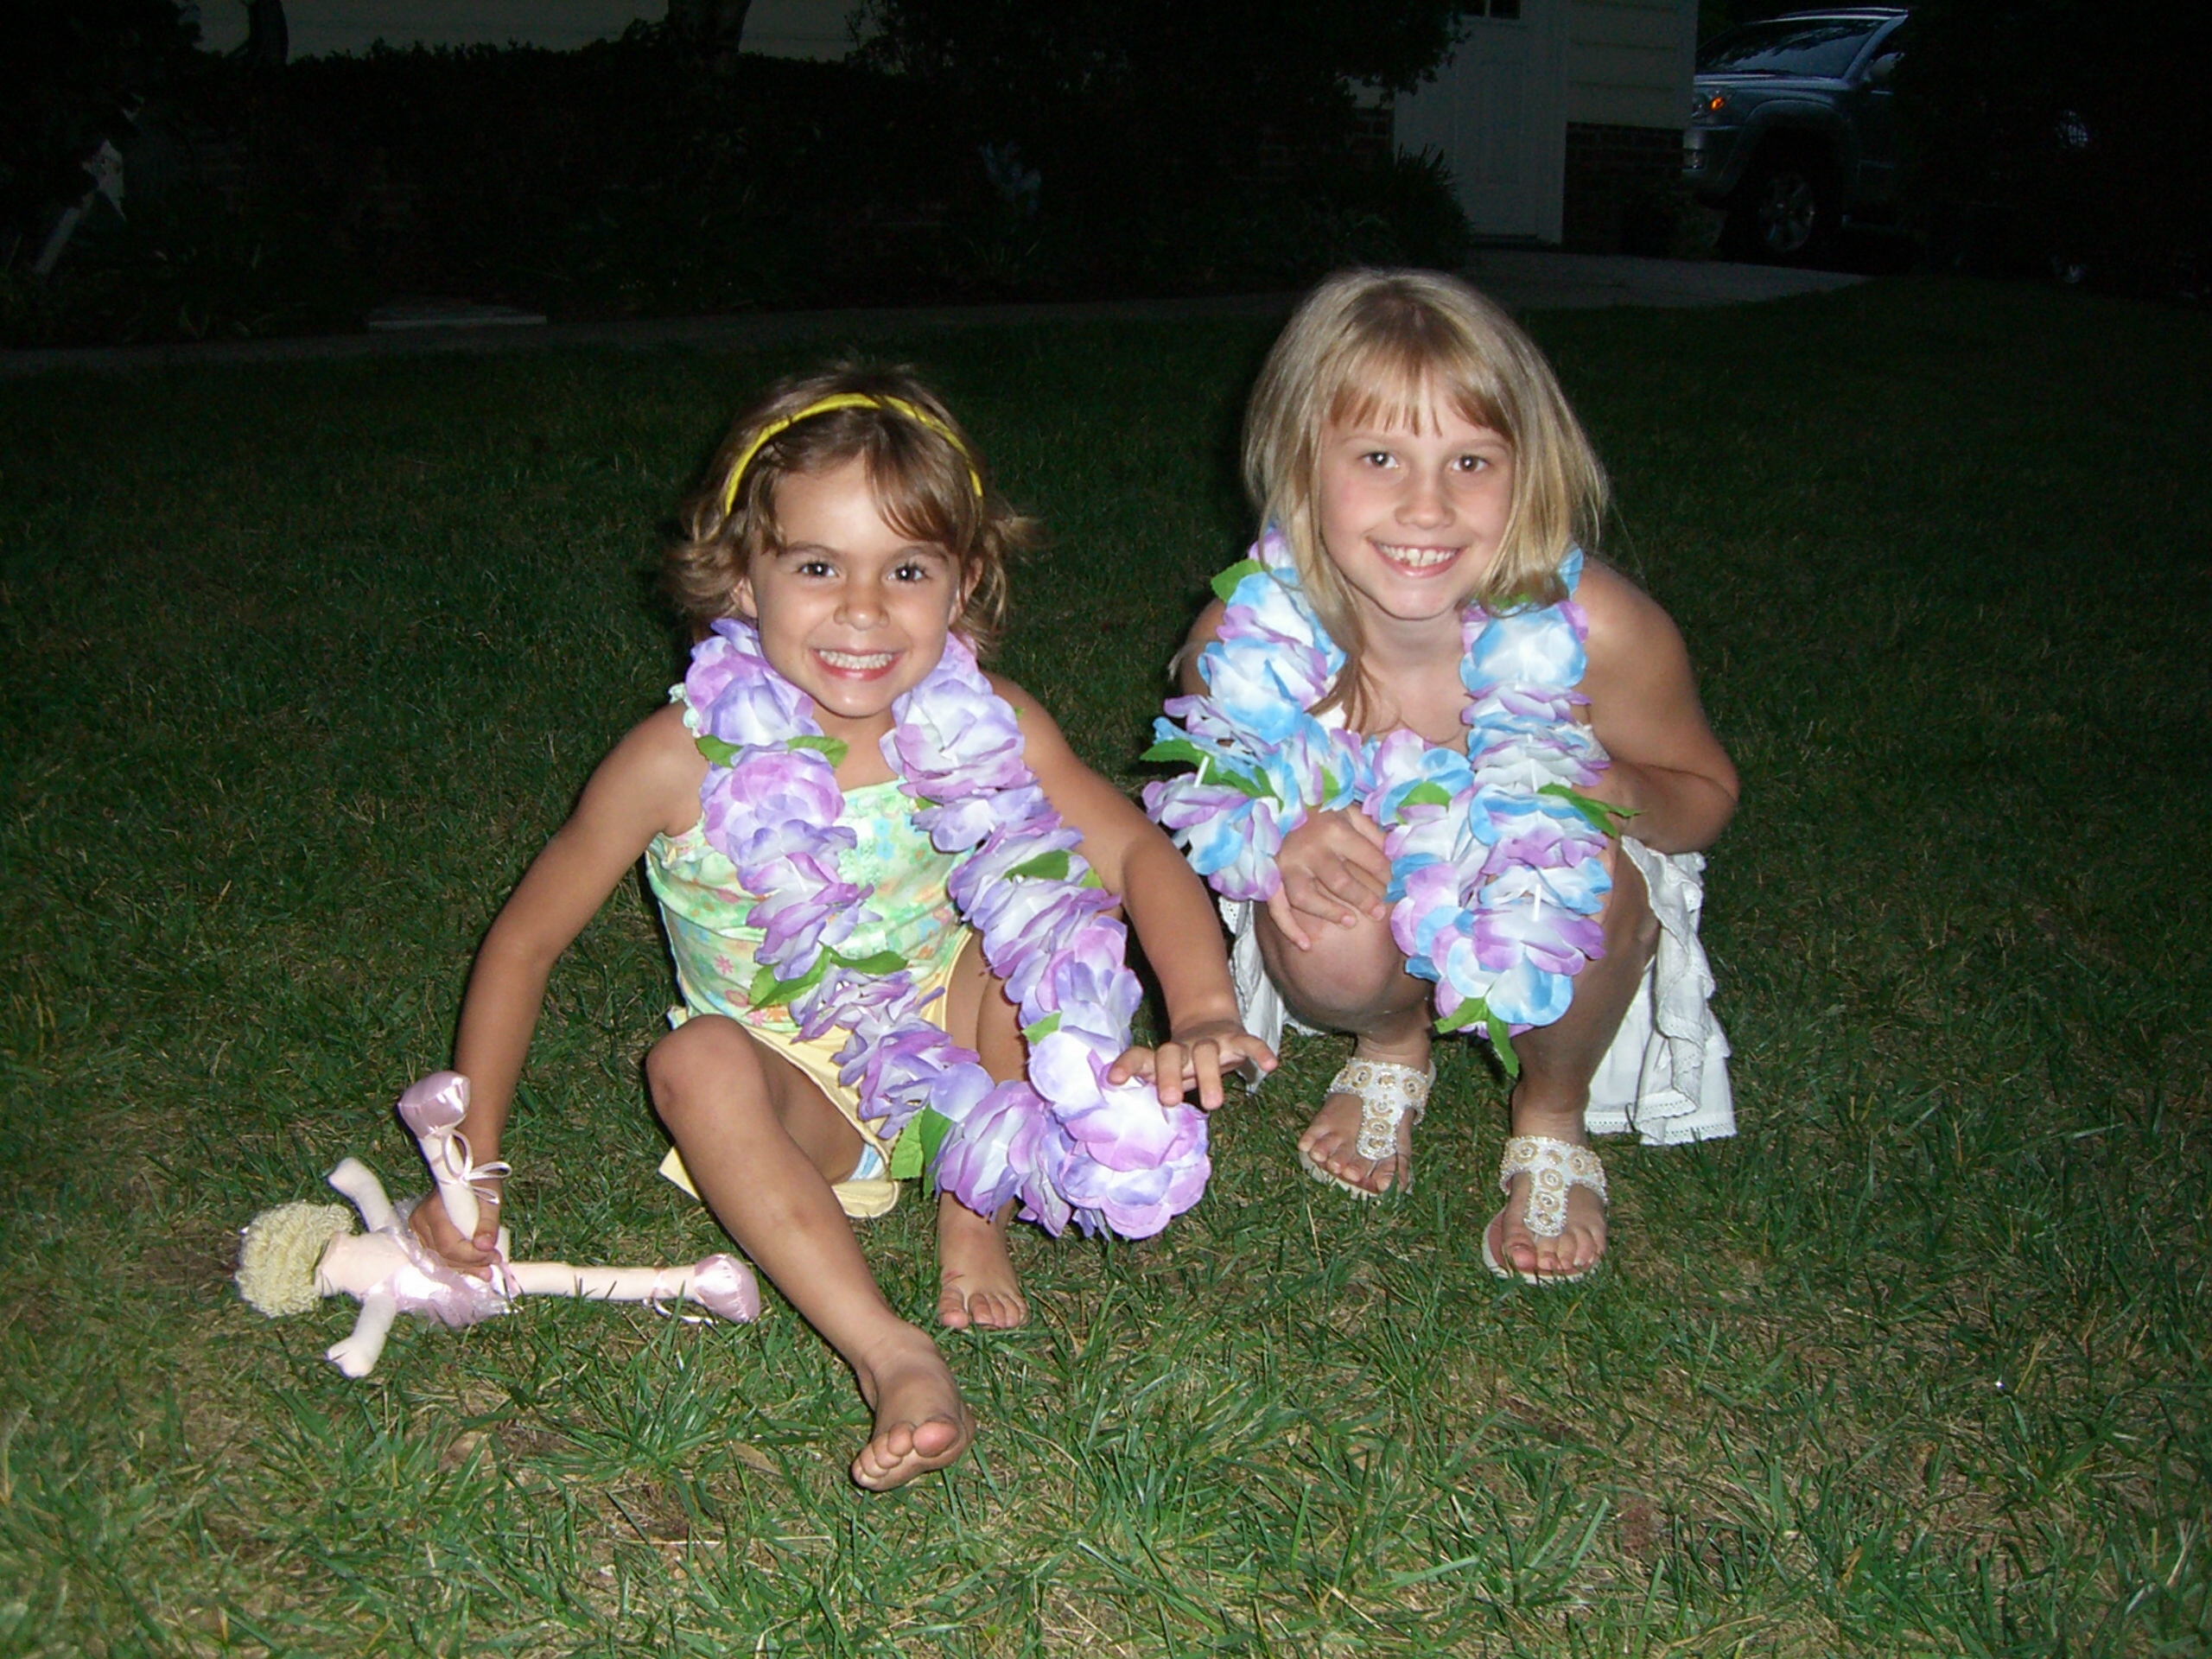 Taylor and Morgan in leis